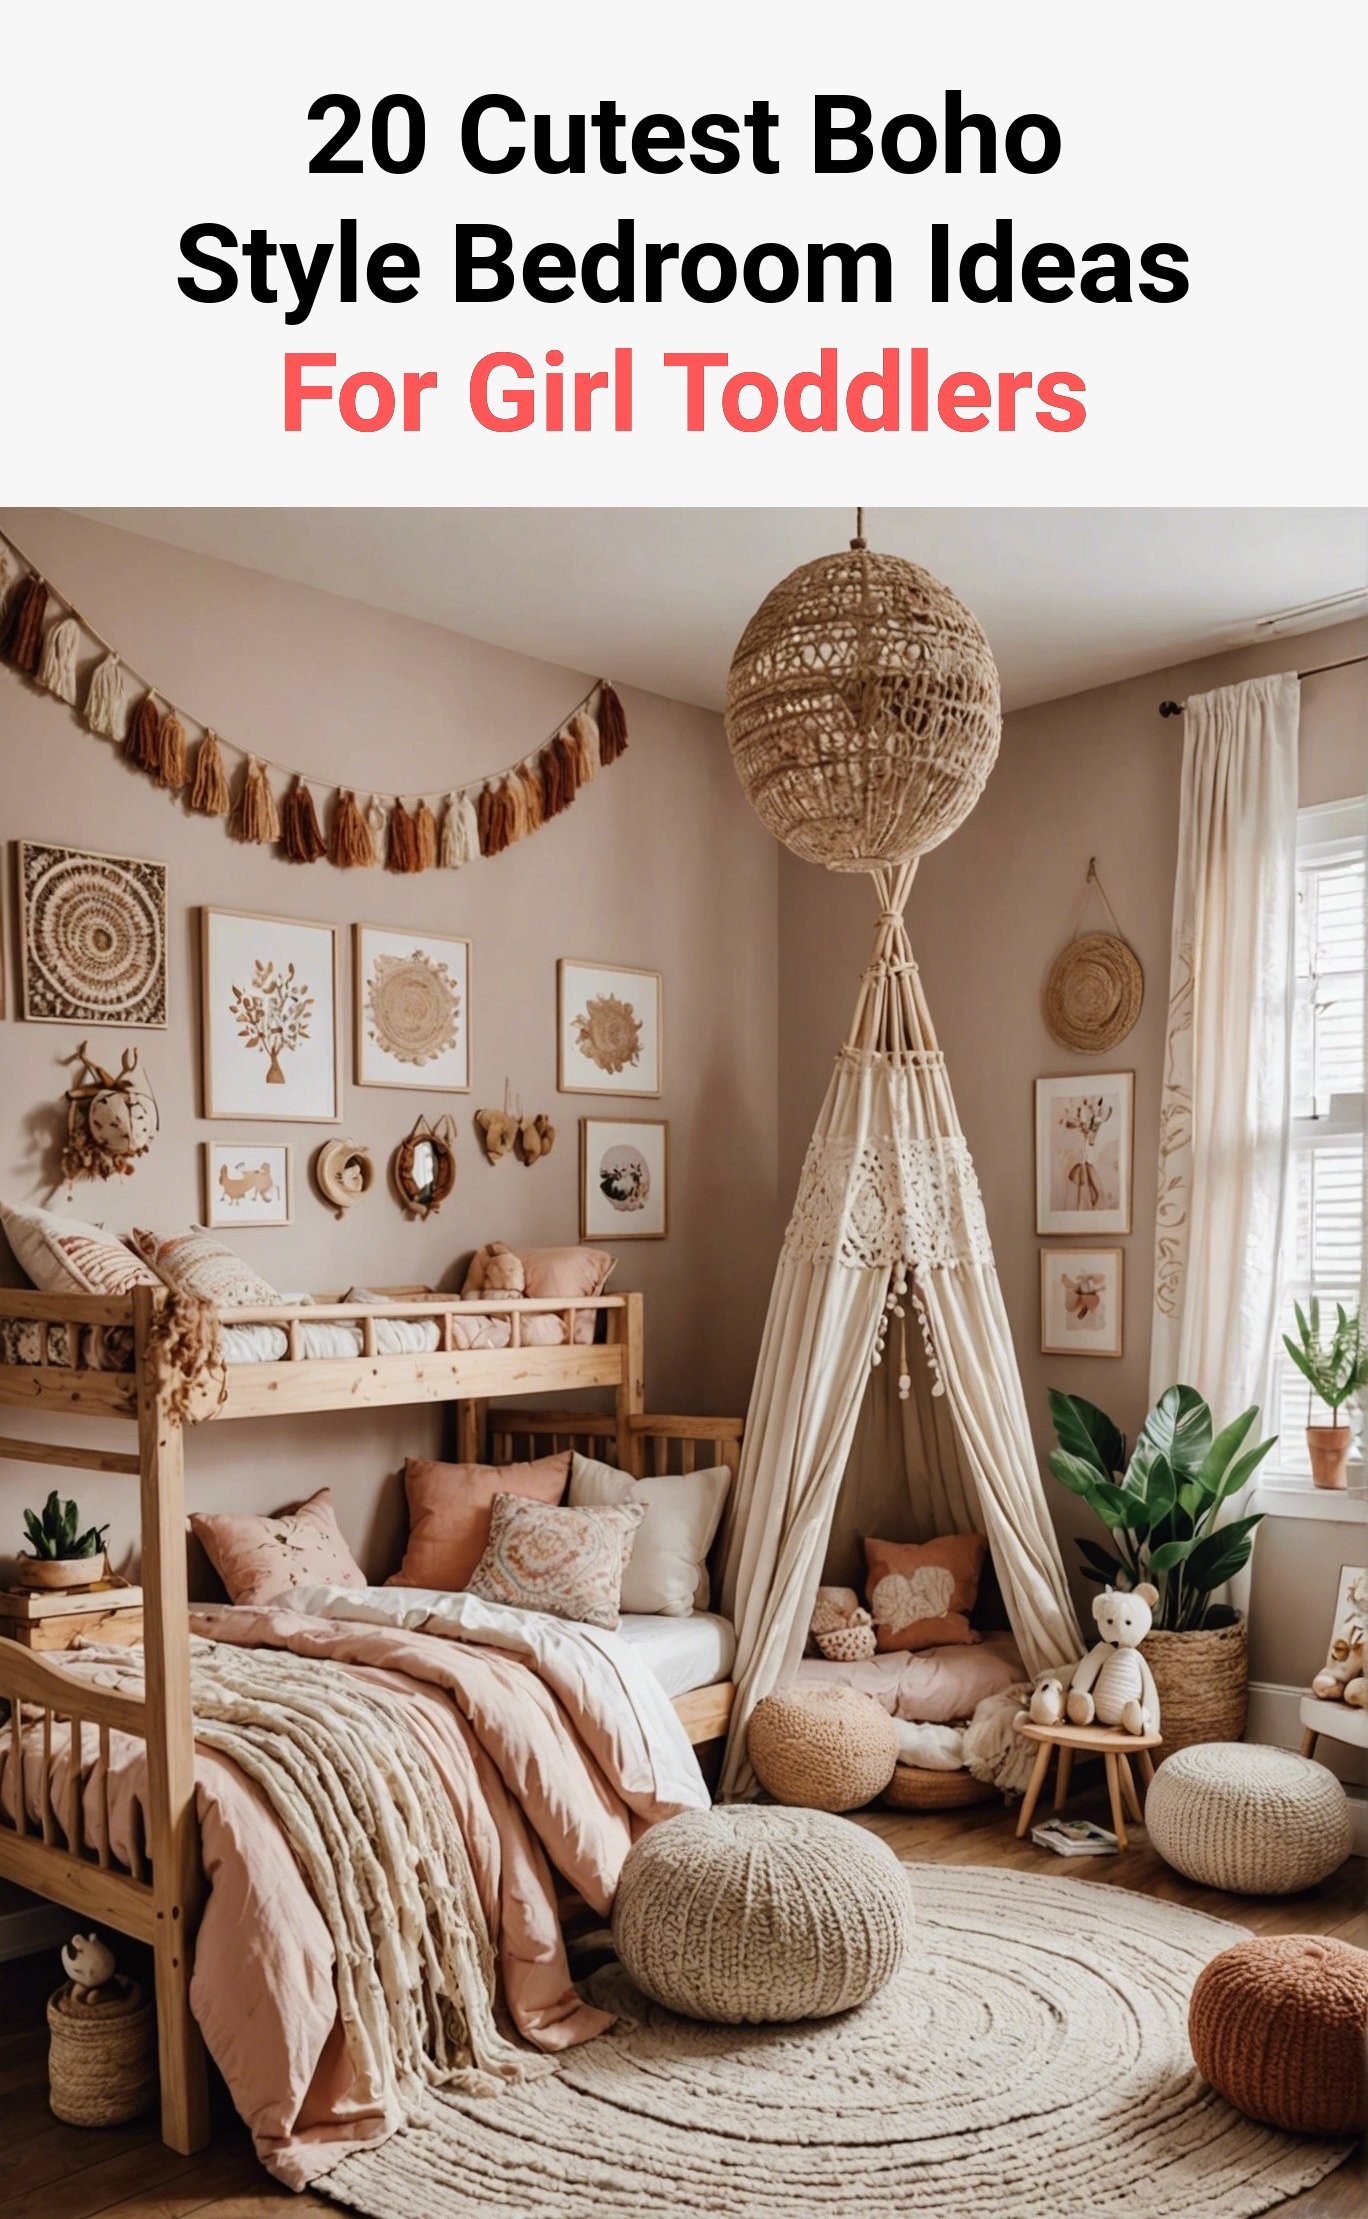 20 Cutest Boho Style Bedroom Ideas For Girl Toddlers